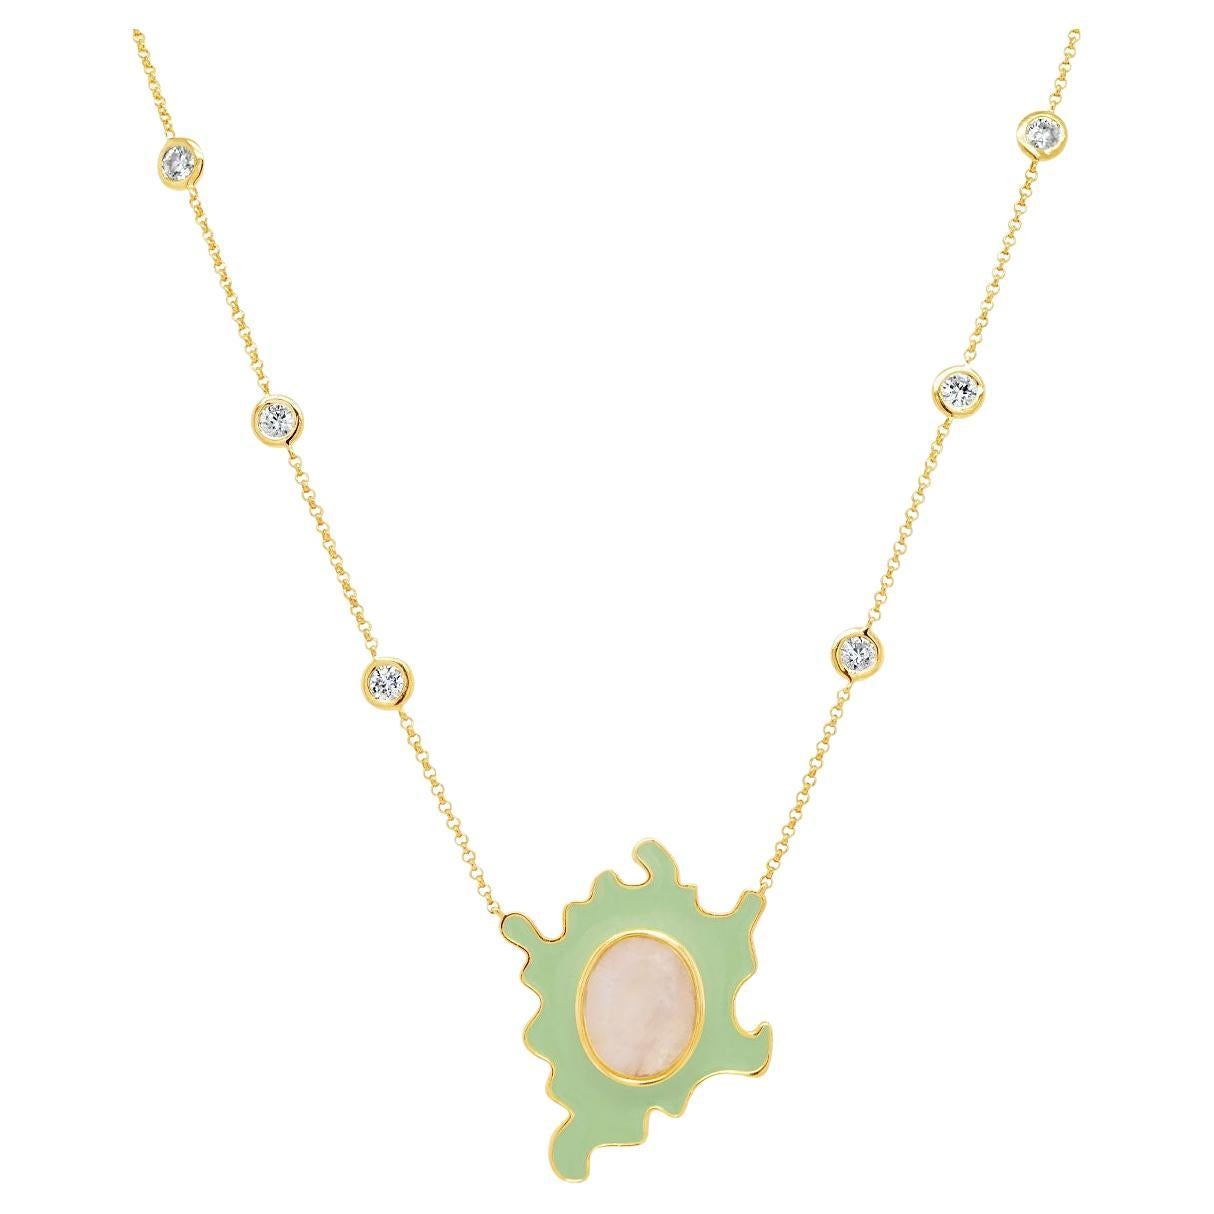 Psychedelic Solitaire Necklace 5.6GMS 3.6CTW Moonstone and Mint Enamel